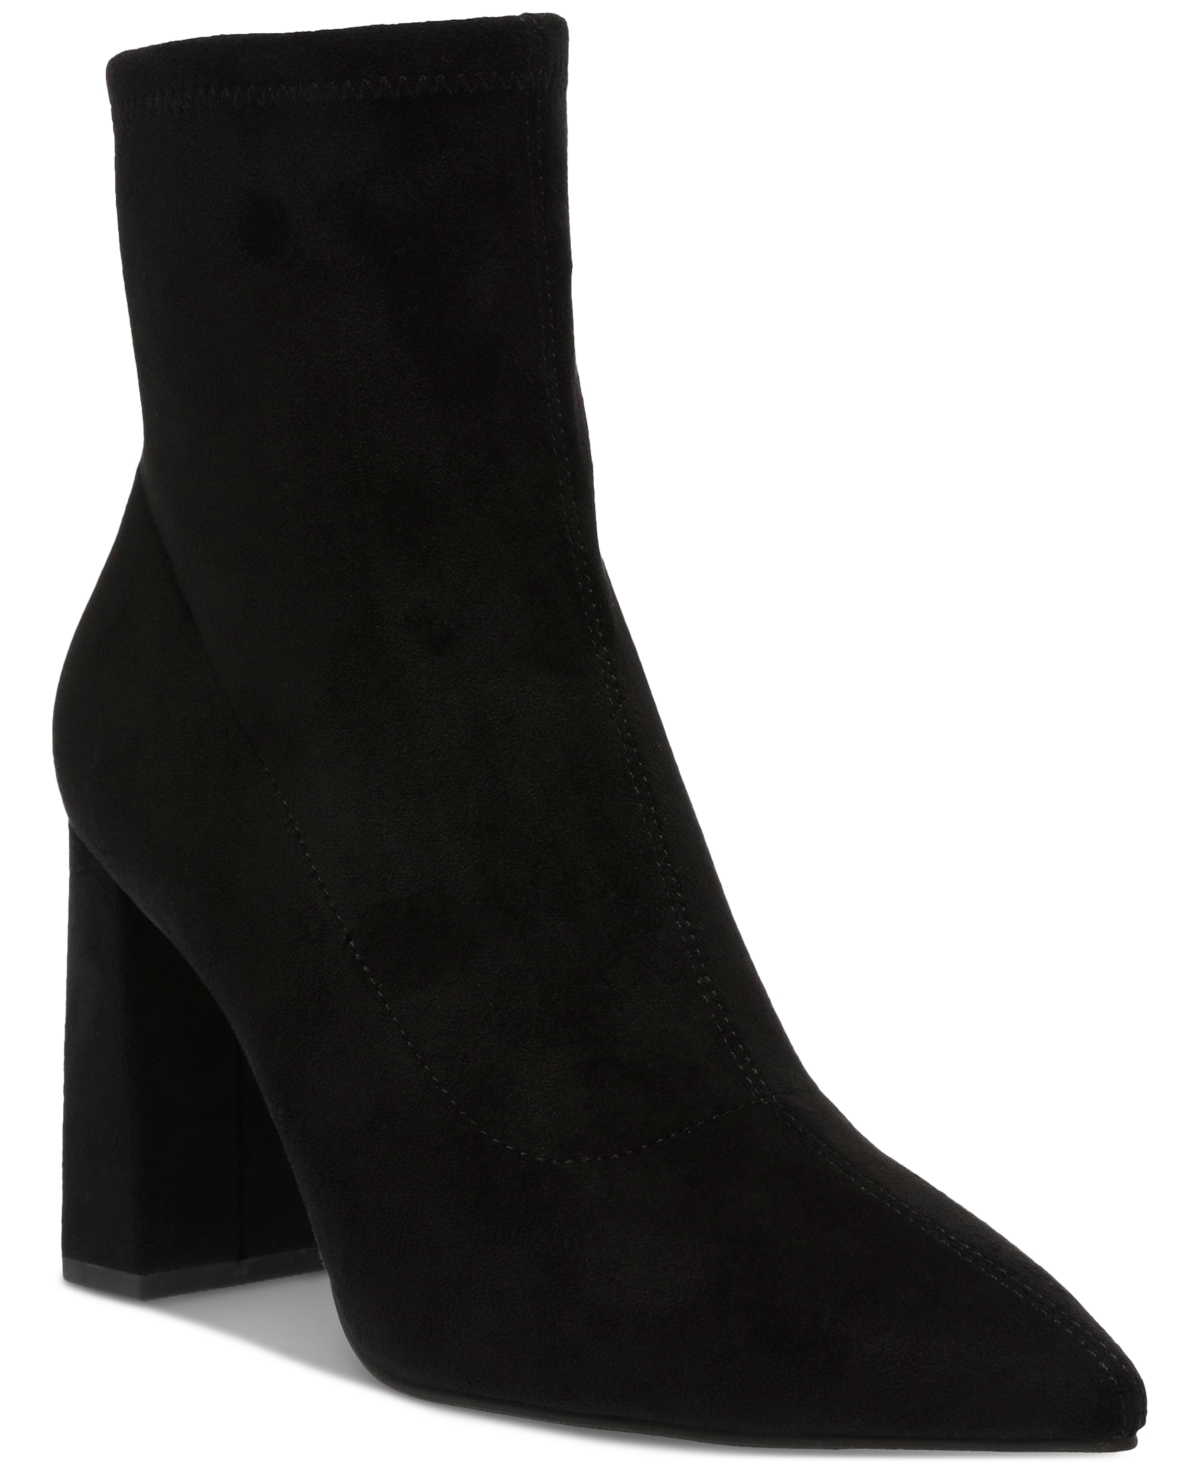 Iloise Pointed-Toe Block-Heel Dress Booties, Created for Macy's - Black Micro